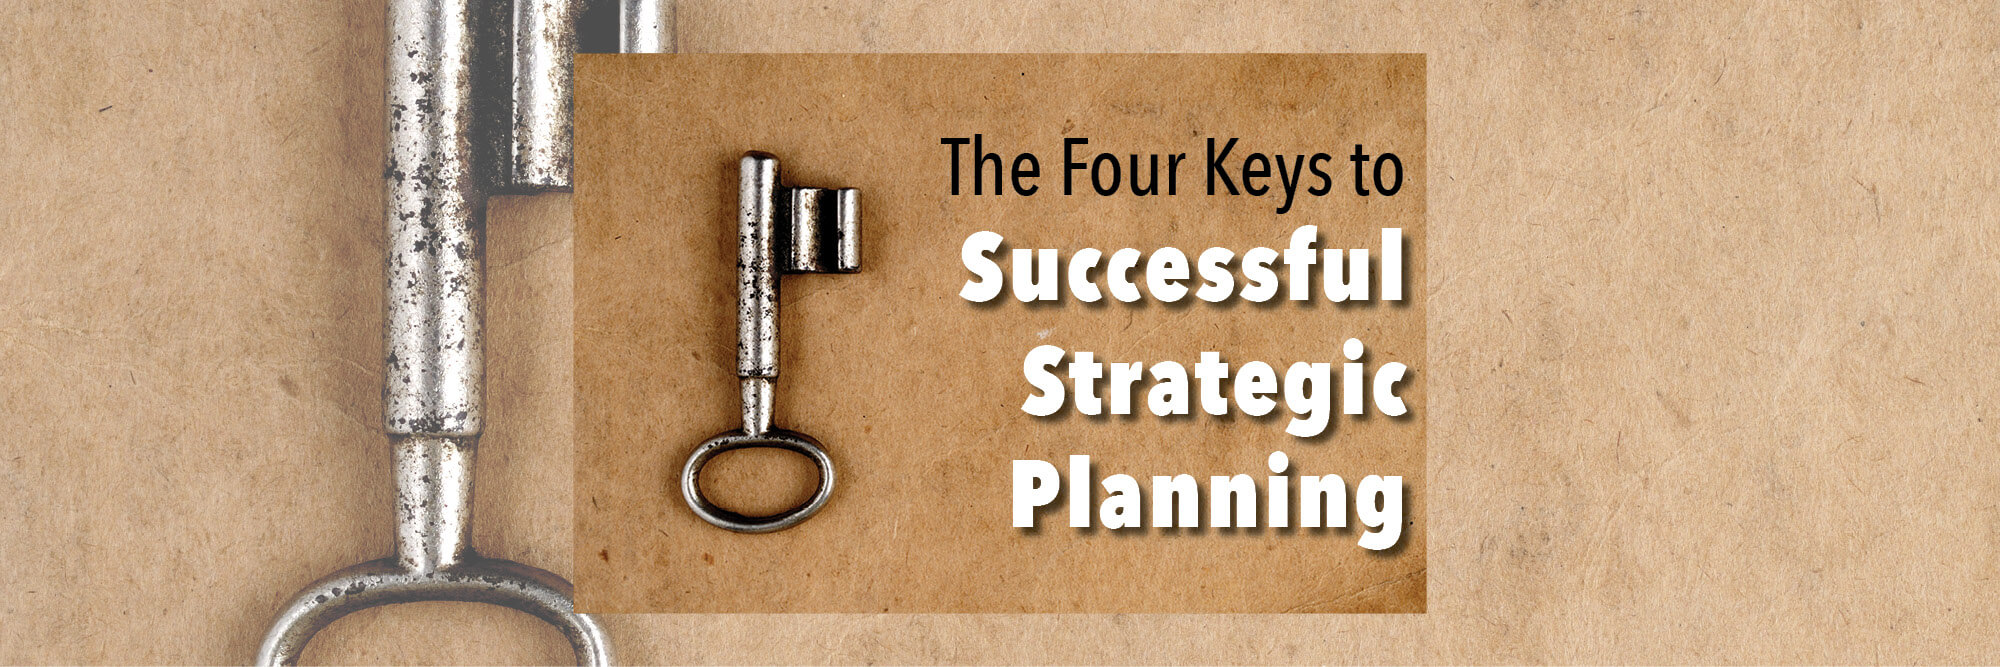 The Four Keys to Successful Strategic Planning